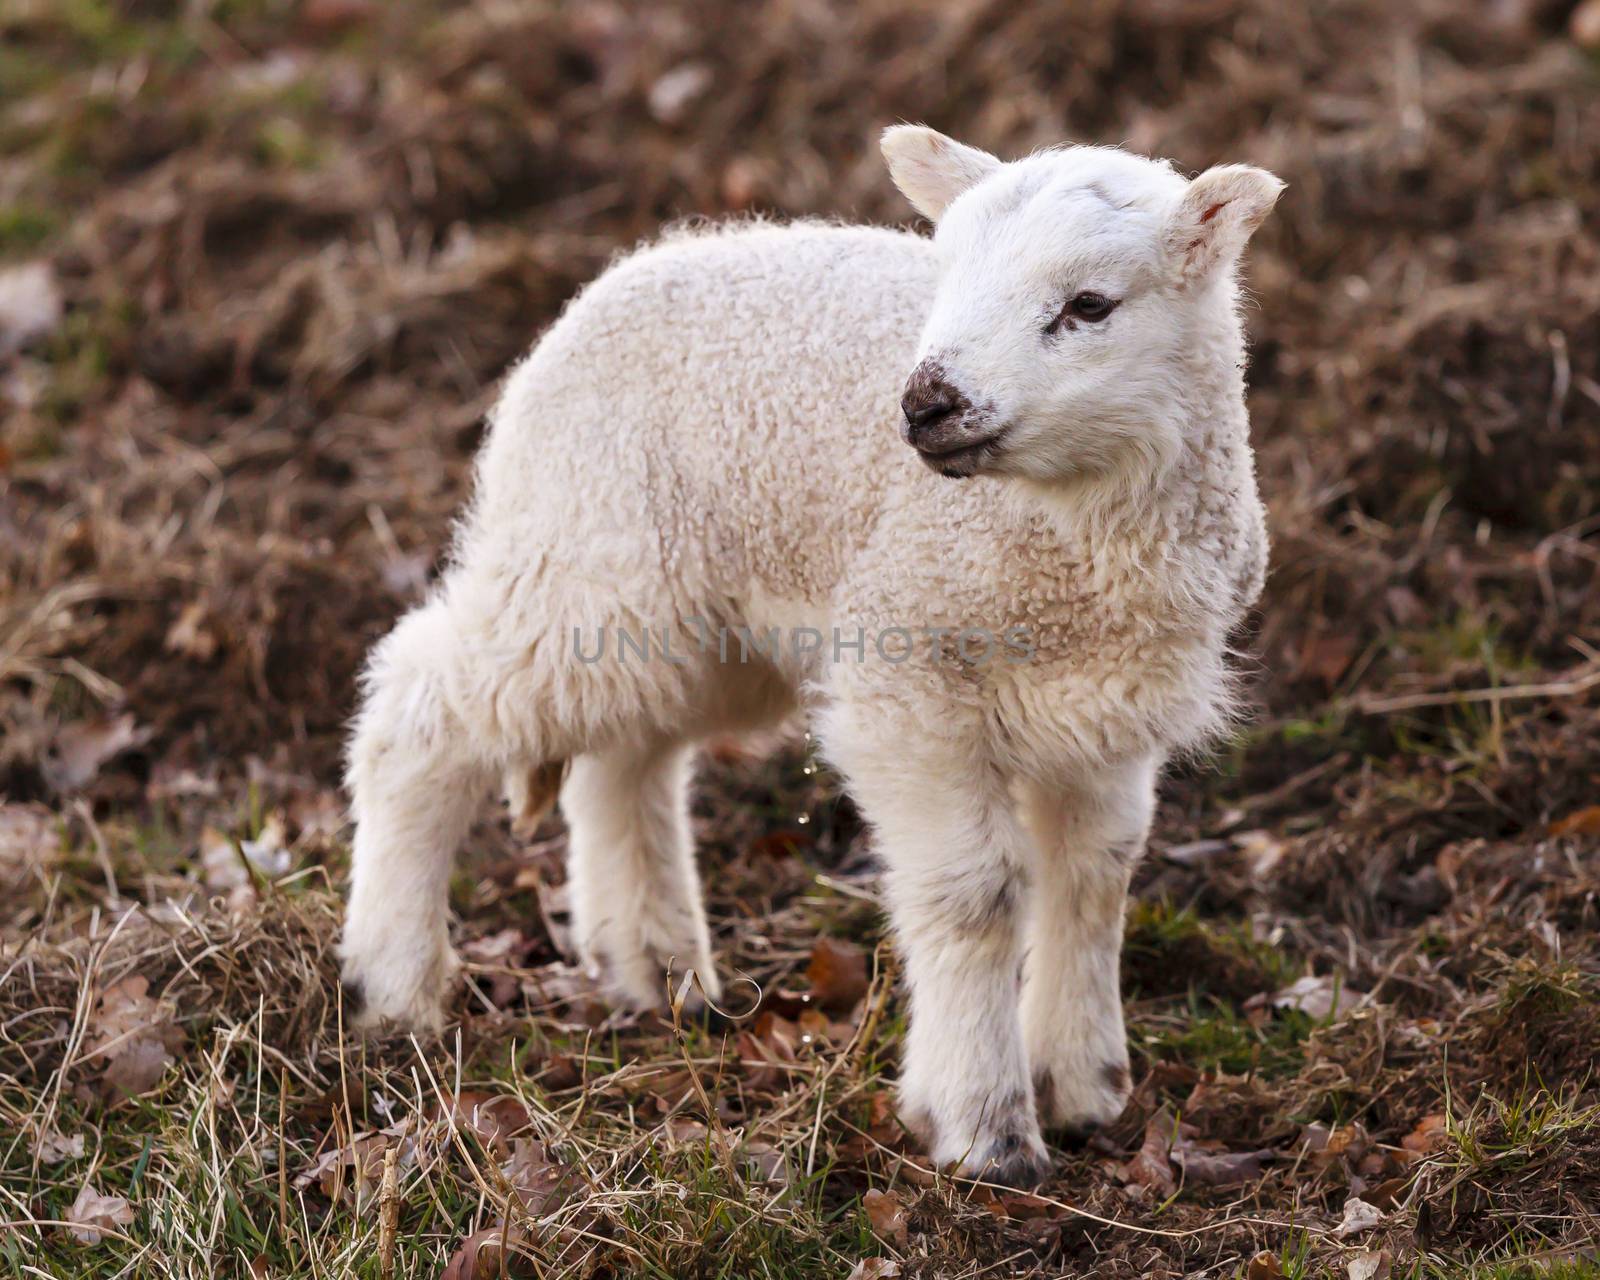 A young lamb urinates beside Ullswater, Cumbria in the English Lake District.